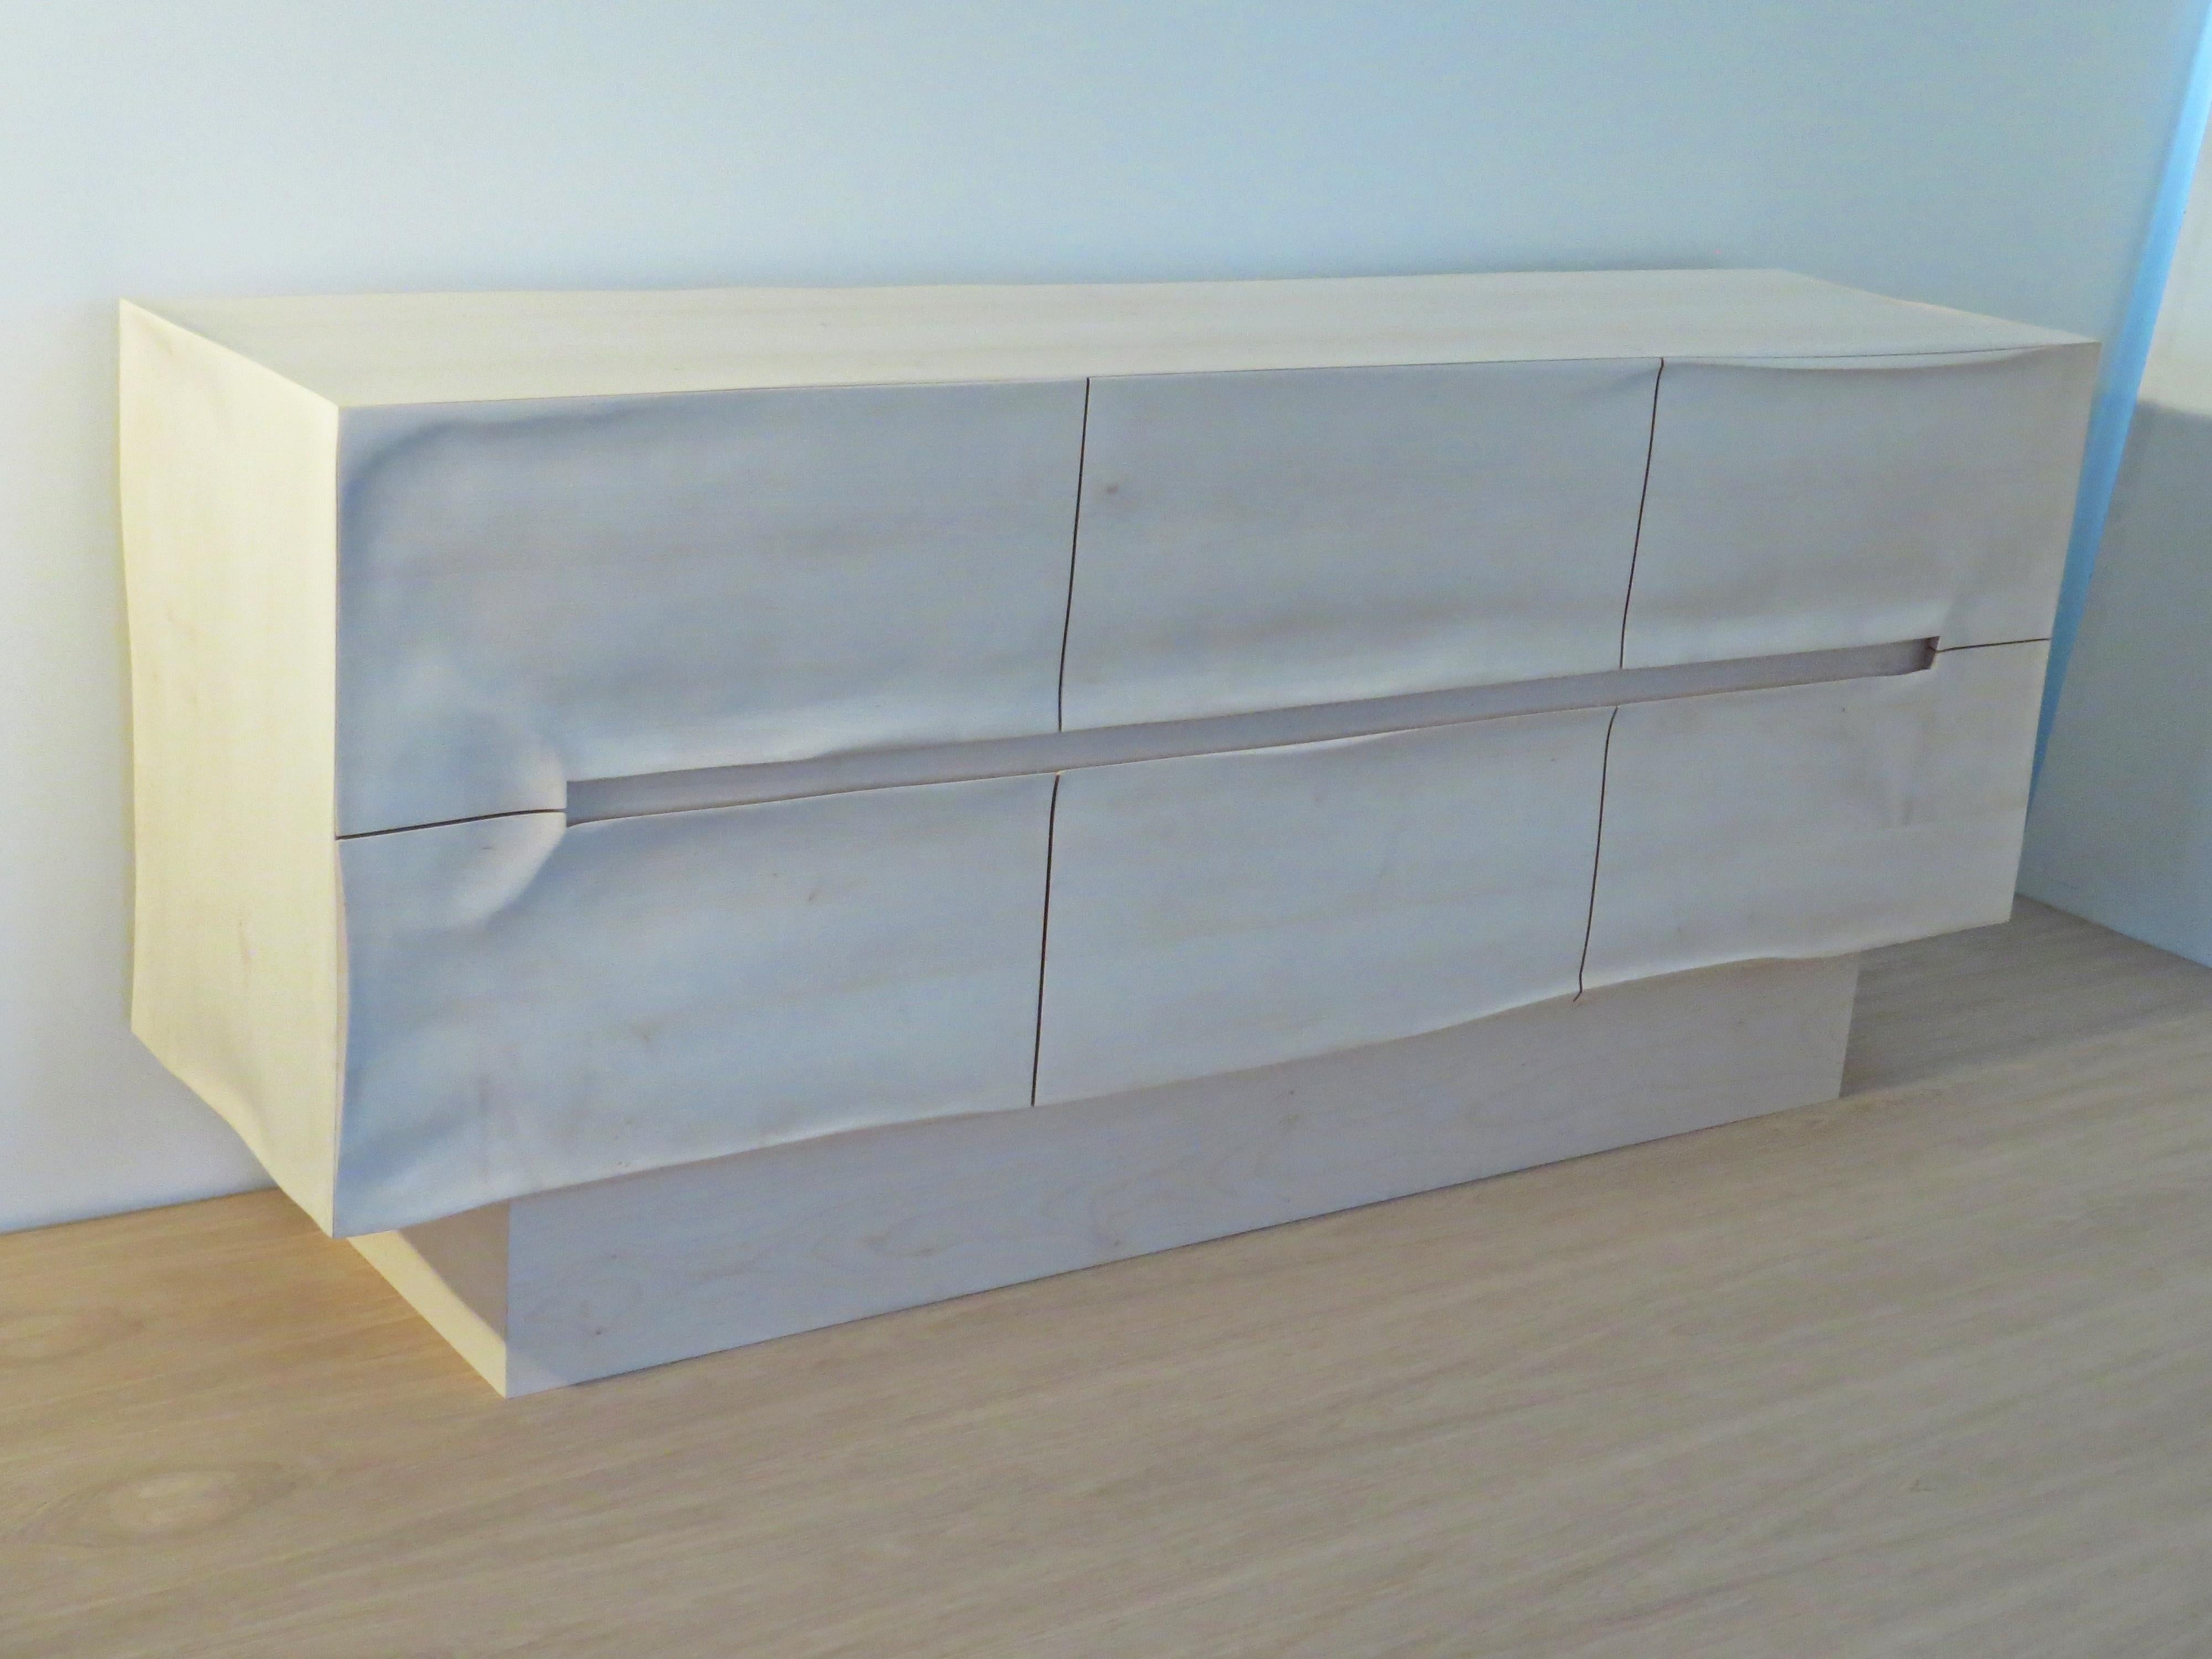 Sideboard Solid Wood, Organic Modern Design, Handcrafted in Germany, Sculptural In New Condition For Sale In Dietmannsried, Bavaria